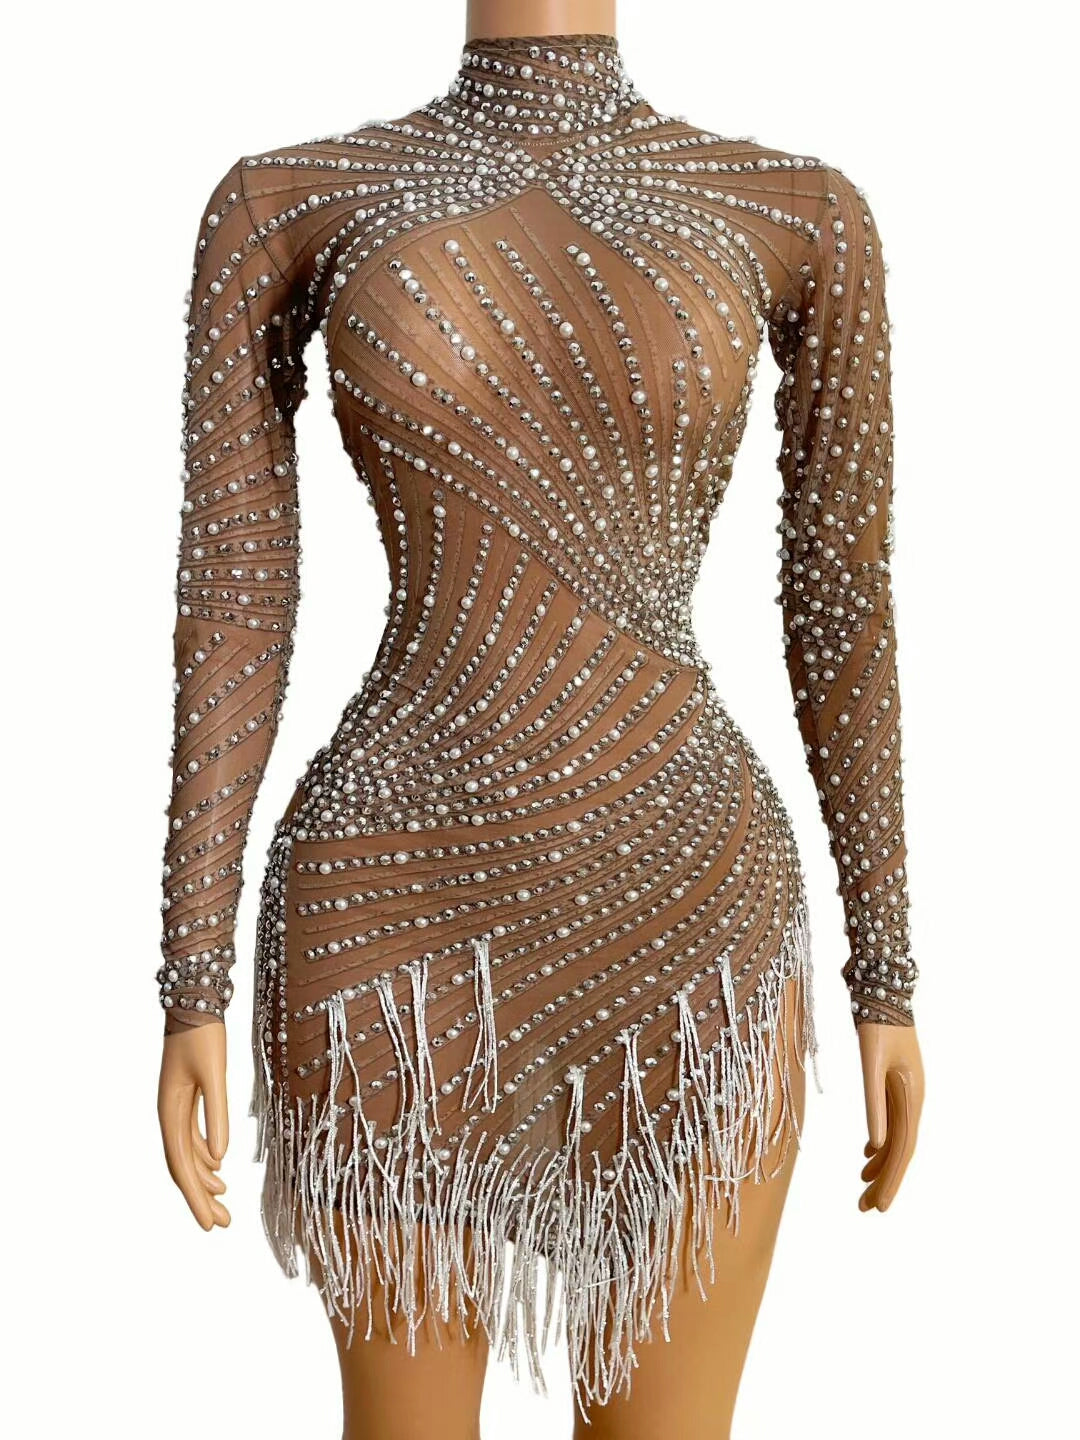 Shining Pearl Rhinestones Short Bodycon Dress Women Birthday Celebrate Party Dress Evening Prom Outfit Sexy Transparent Dress